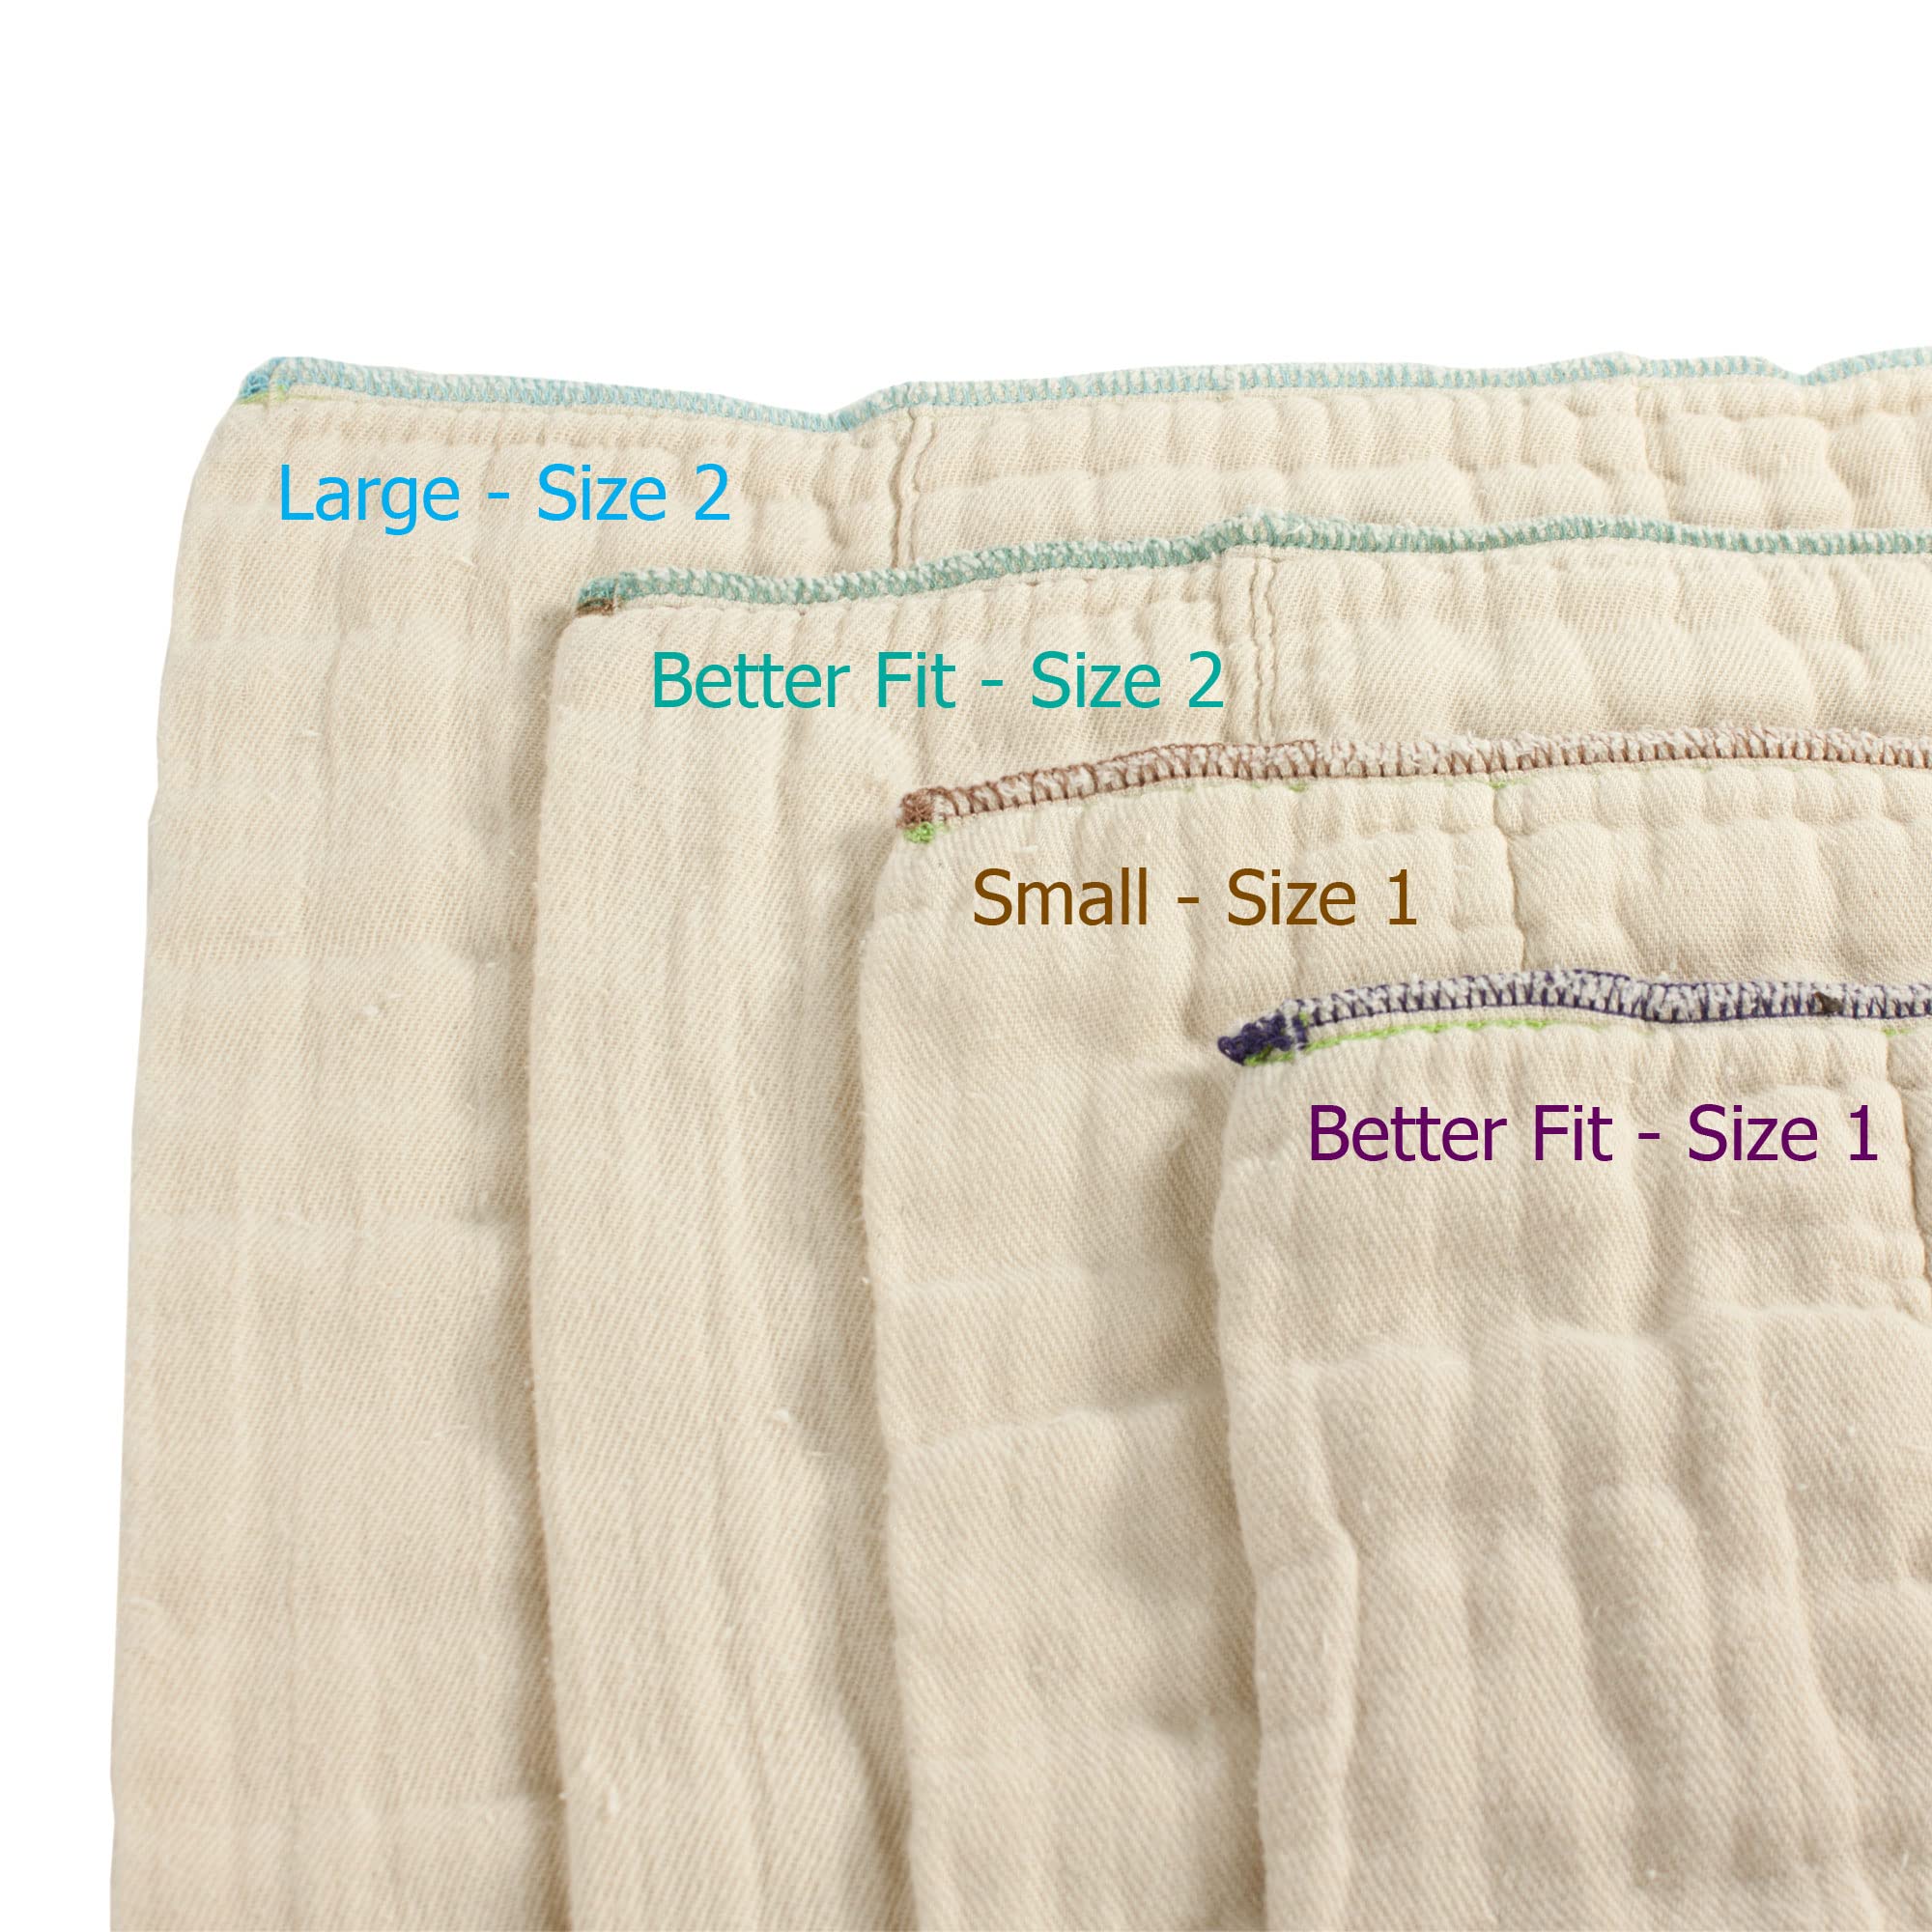 OsoCozy Organic Cotton Prefold Cloth Diapers Traditional Fit Large 4x8x4 Layering (6pk) - Super-Soft, Thick, Absorbent, Durable and Ecologically Friendlier. Unbleached Natural Color, Fits 15-30 Lbs.